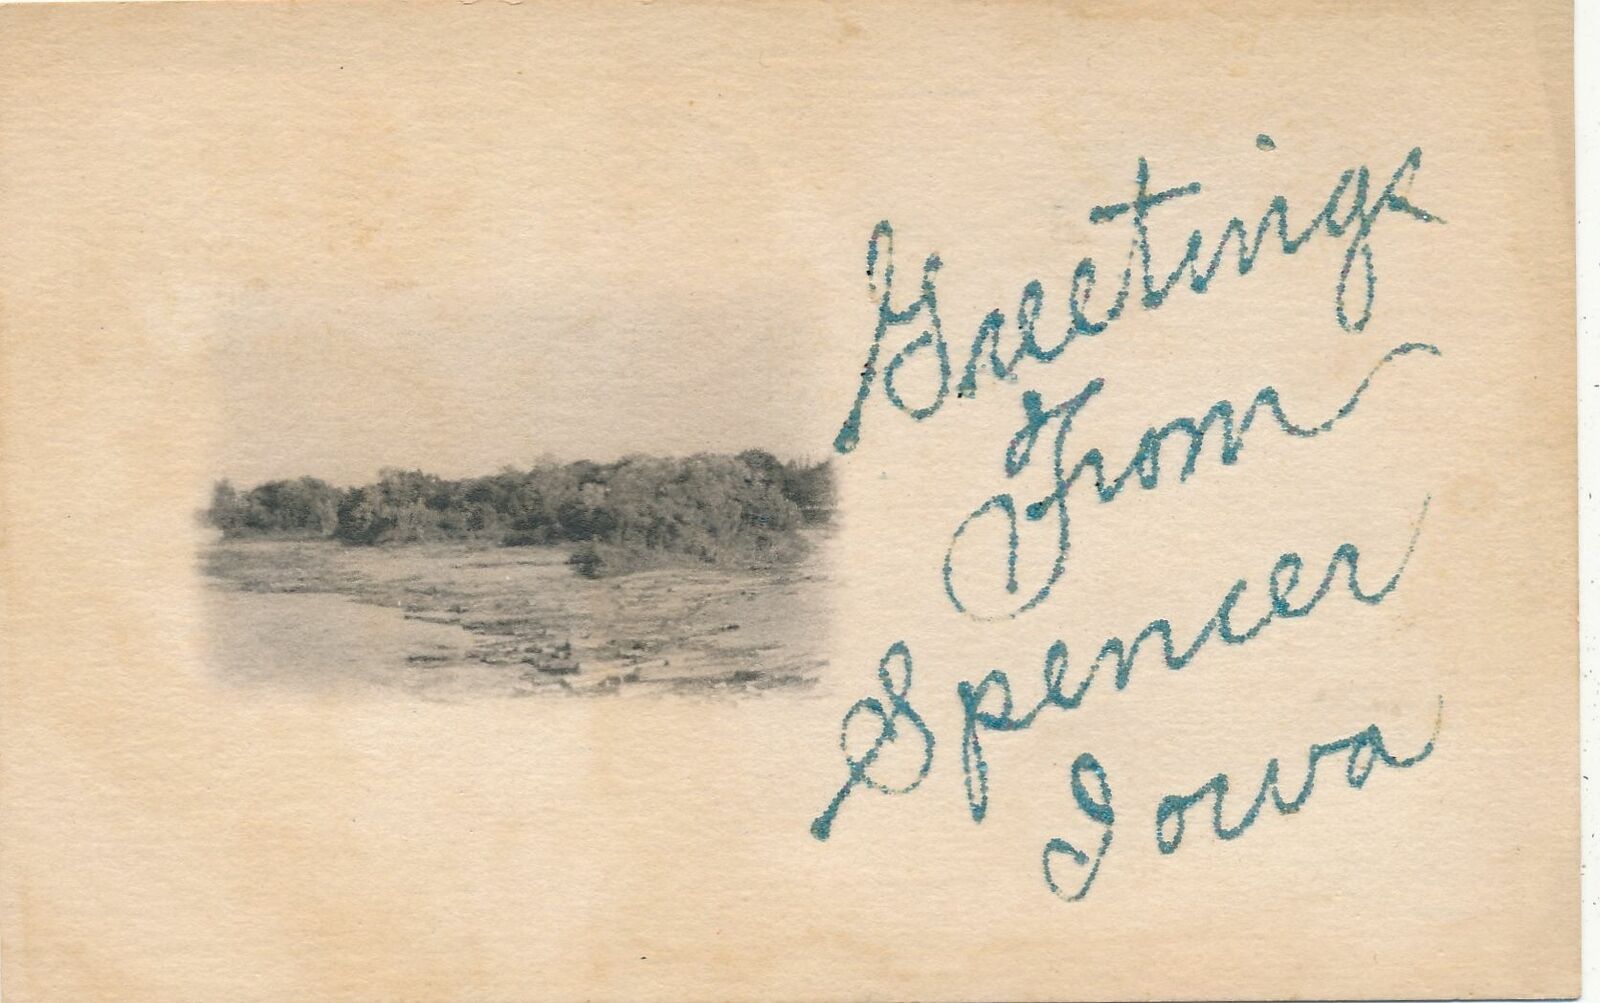 SPENCER IA - Greetings From Spencer Postcard